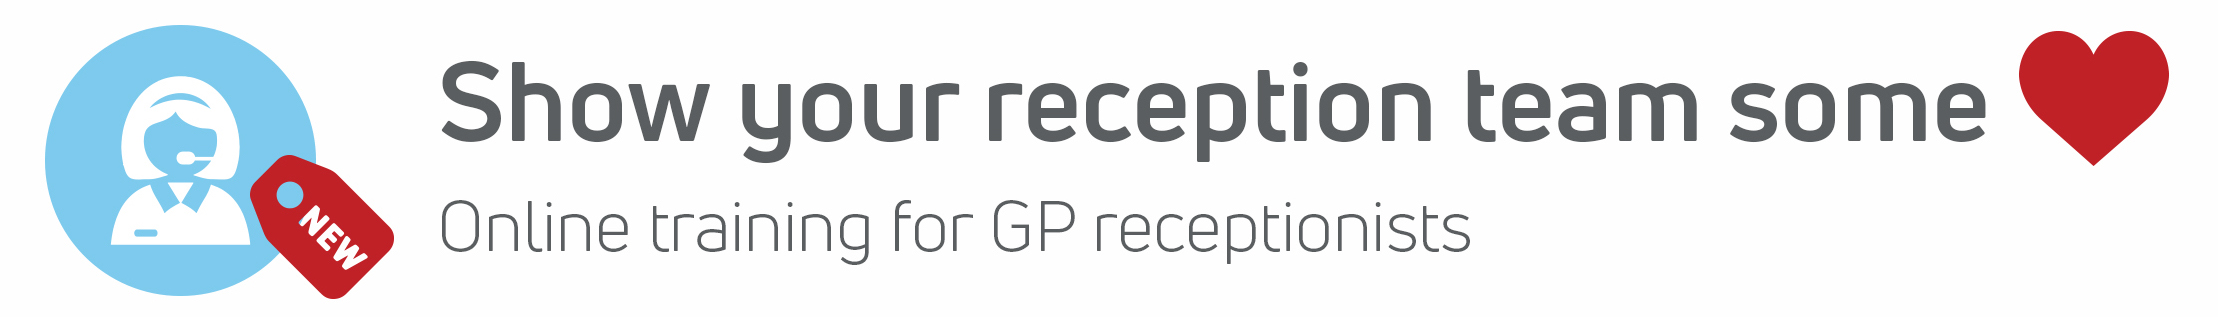 Online training course for GP receptionists